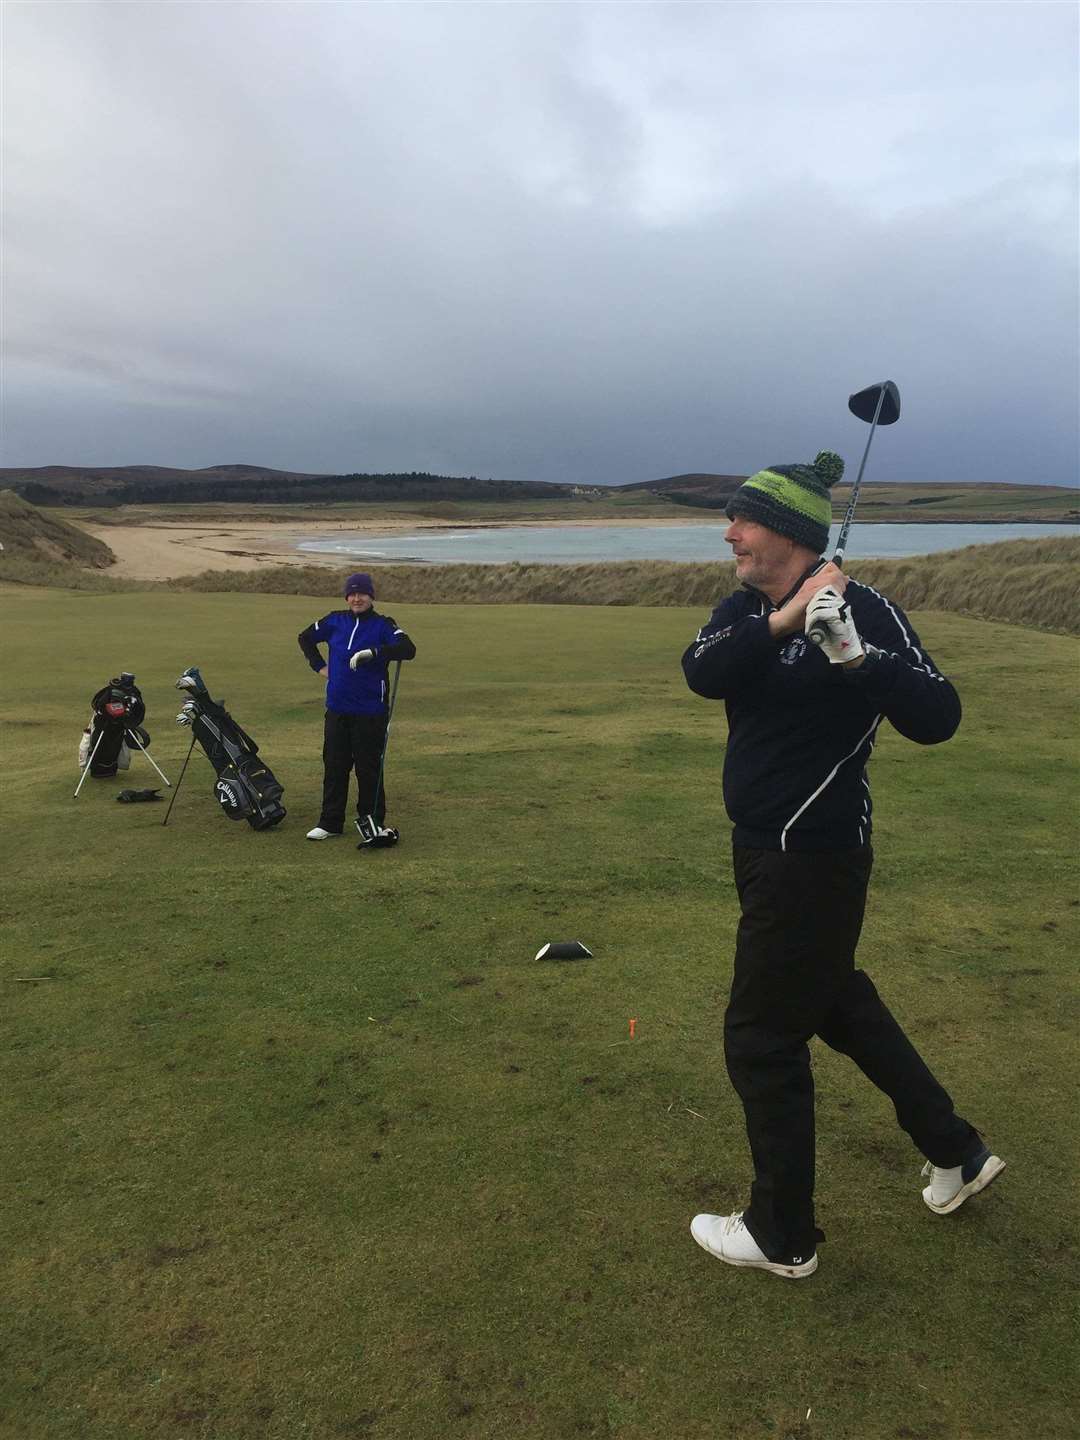 Donald Mowat teeing off at the 10th tee - Donald won round eight of Reay Golf Club's winter league stableford competition last weekend.